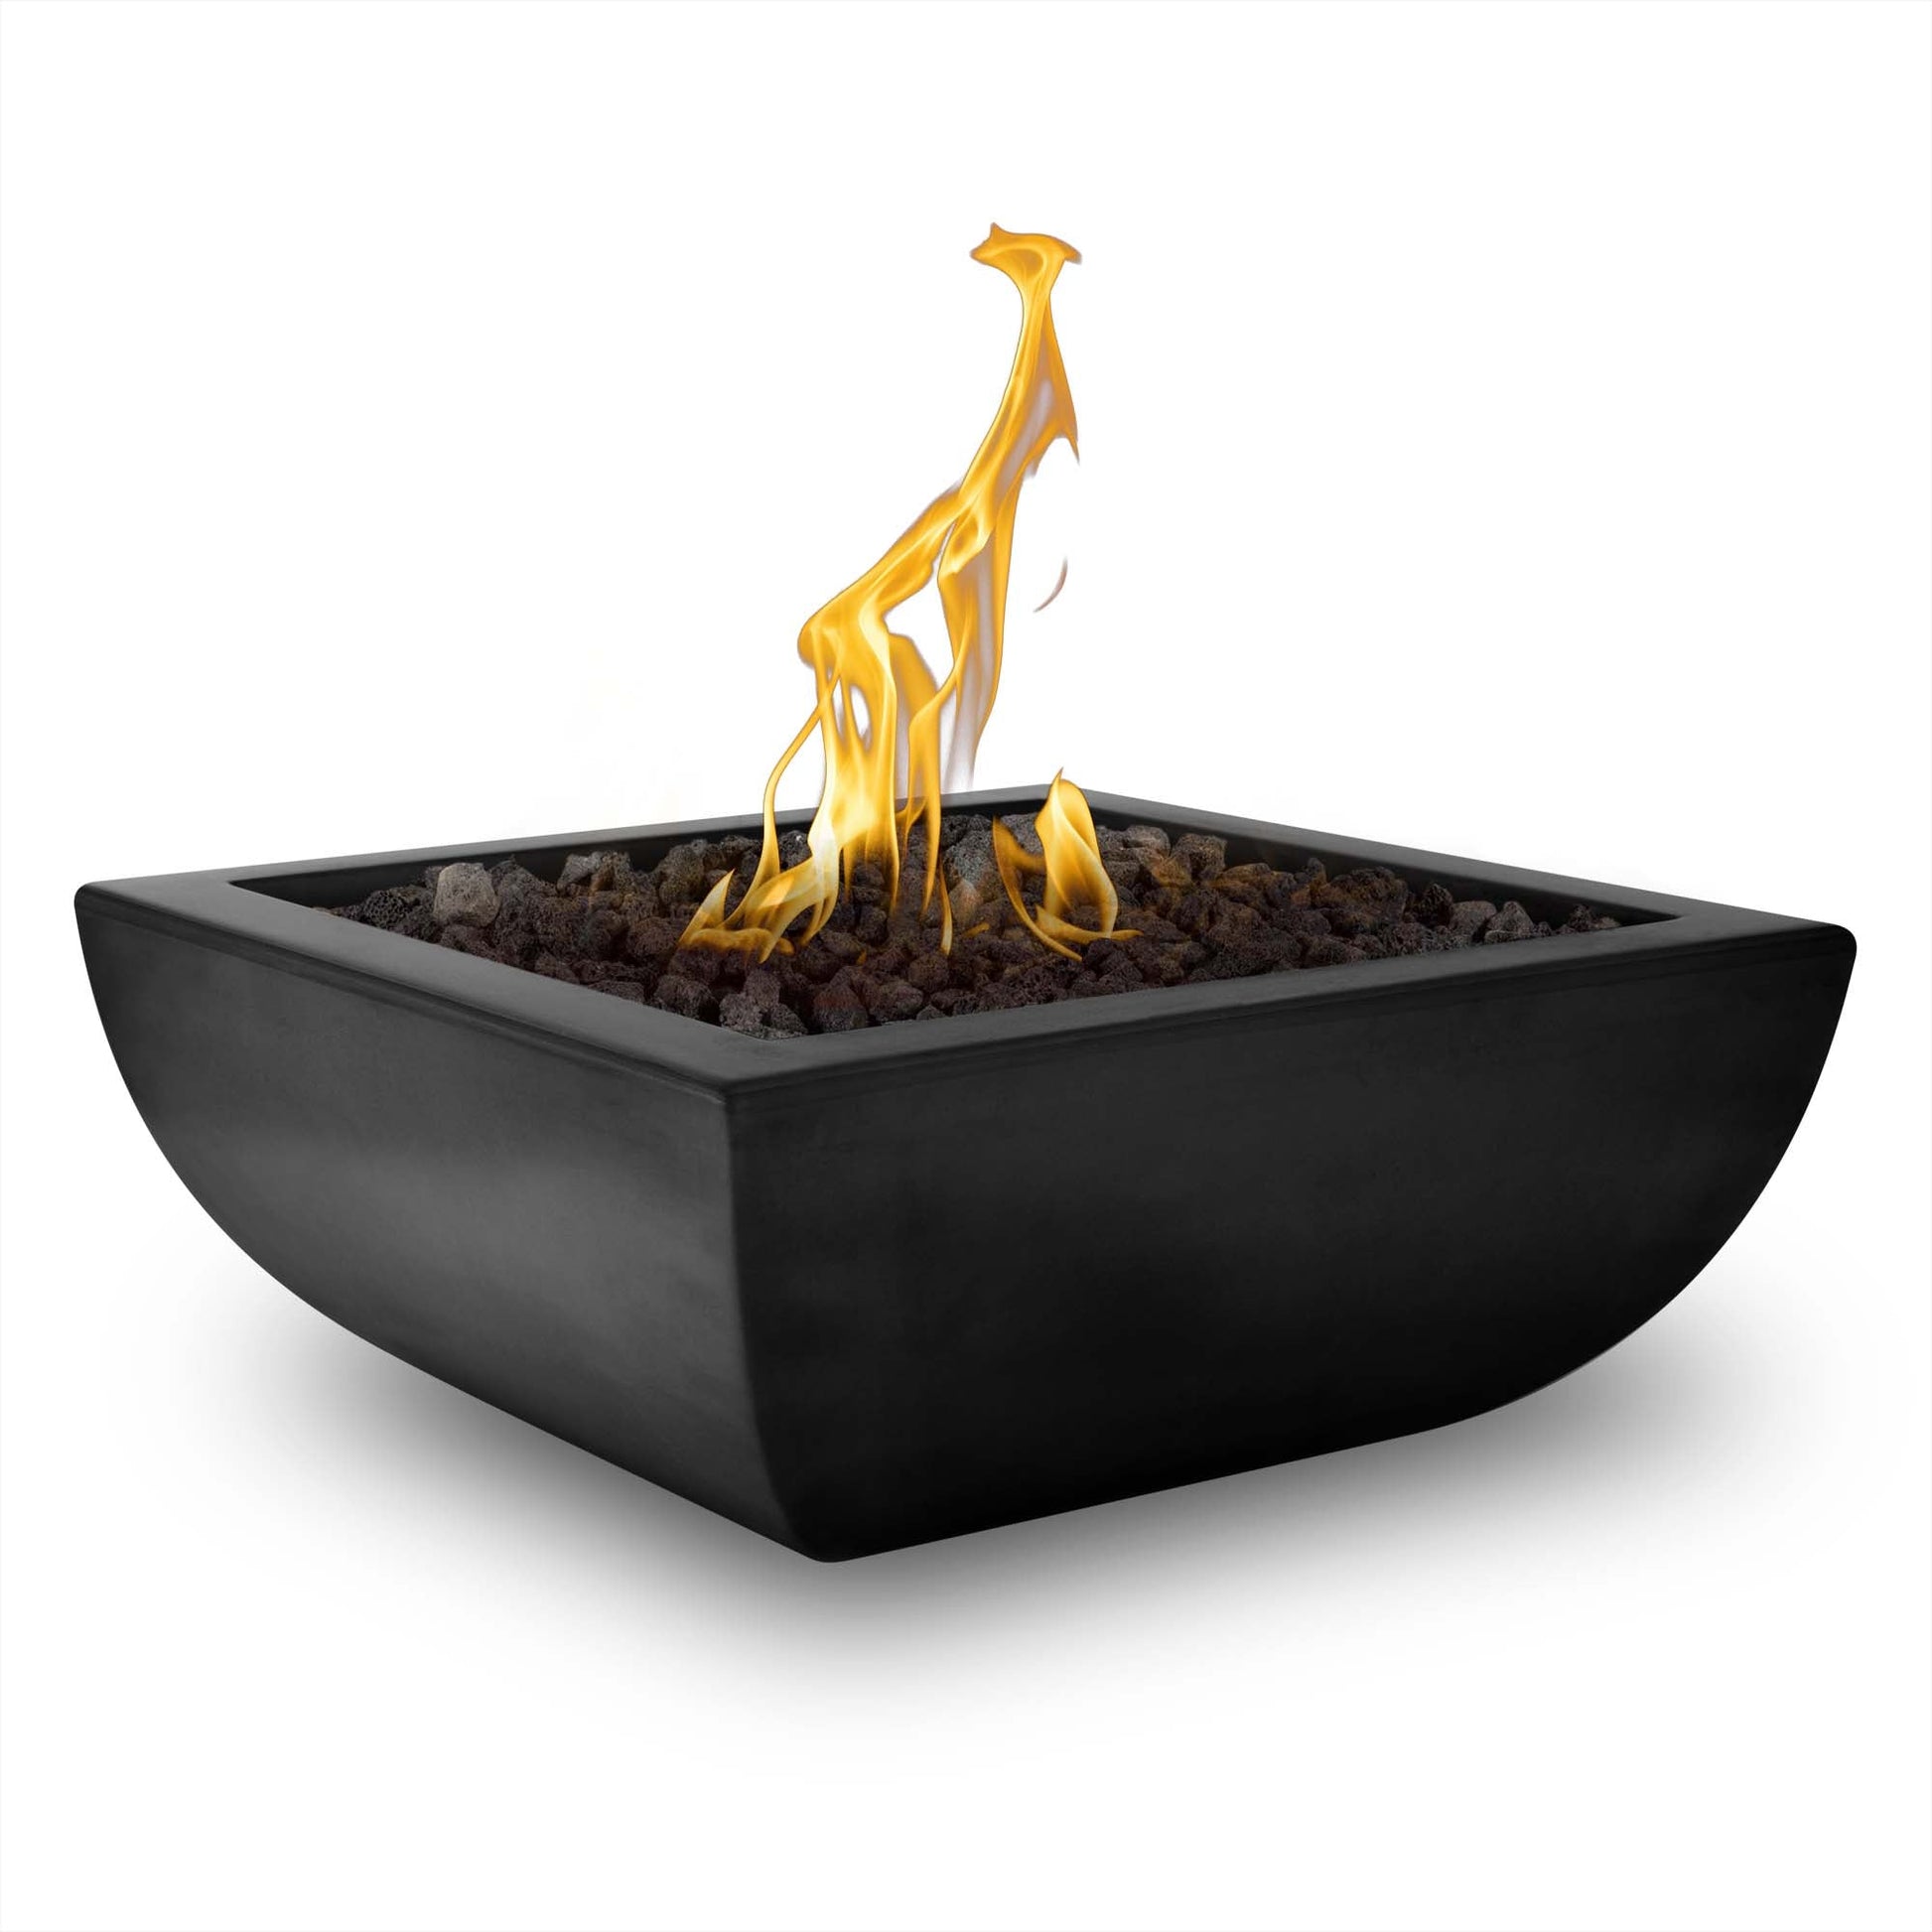 The Outdoor Plus Square Avalon 30" Vanilla GFRC Concrete Natural Gas Fire Bowl with Match Lit with Flame Sense Ignition